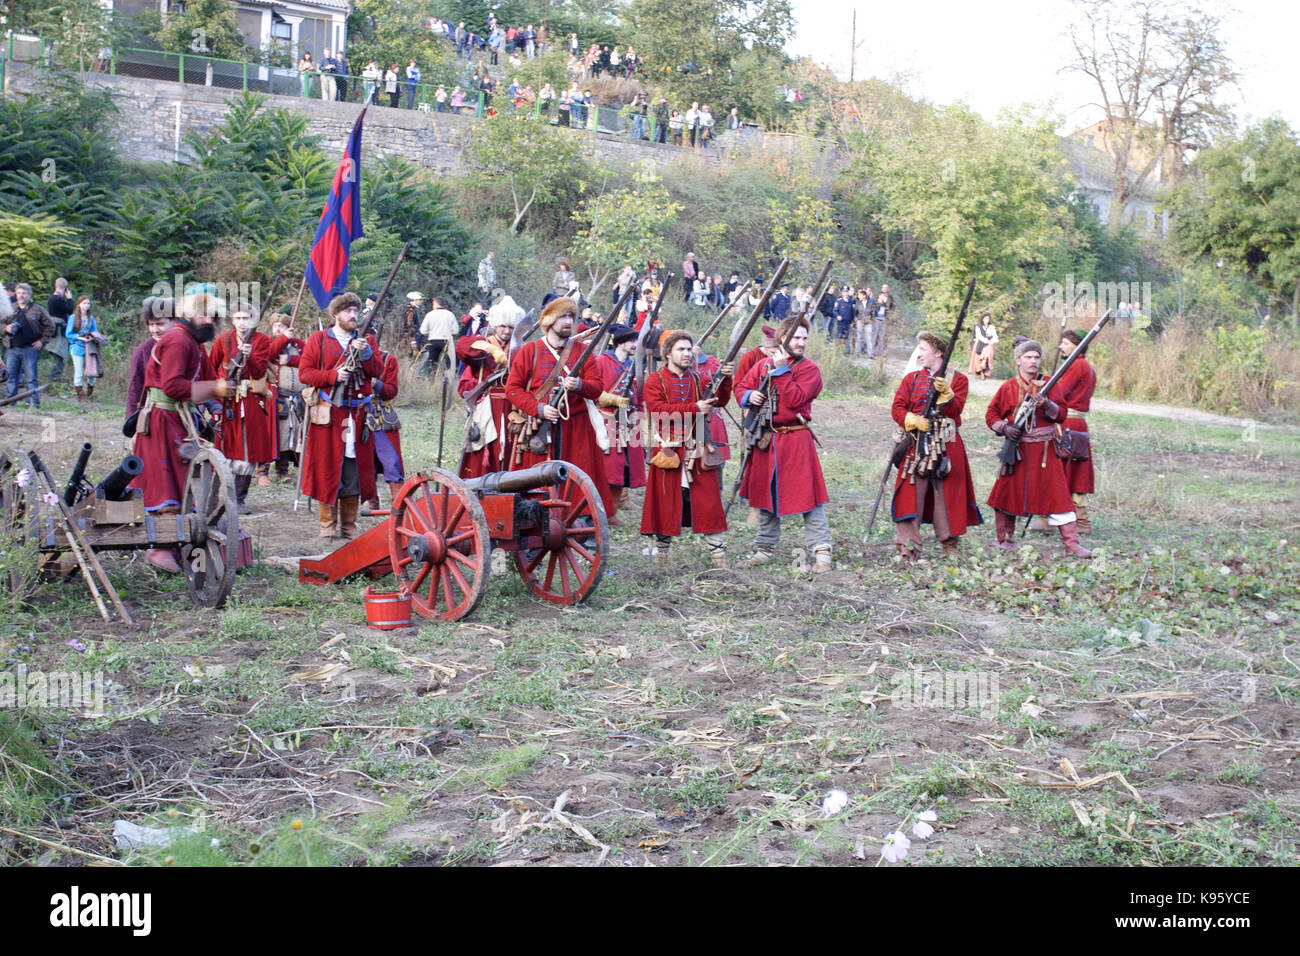 KAMYANETS-PODILSKY, UKRAINE - OCTOBER 3, 2009: Members of history club wear historical uniform 17 century during historical reenactment. Grand Duchy o Stock Photo